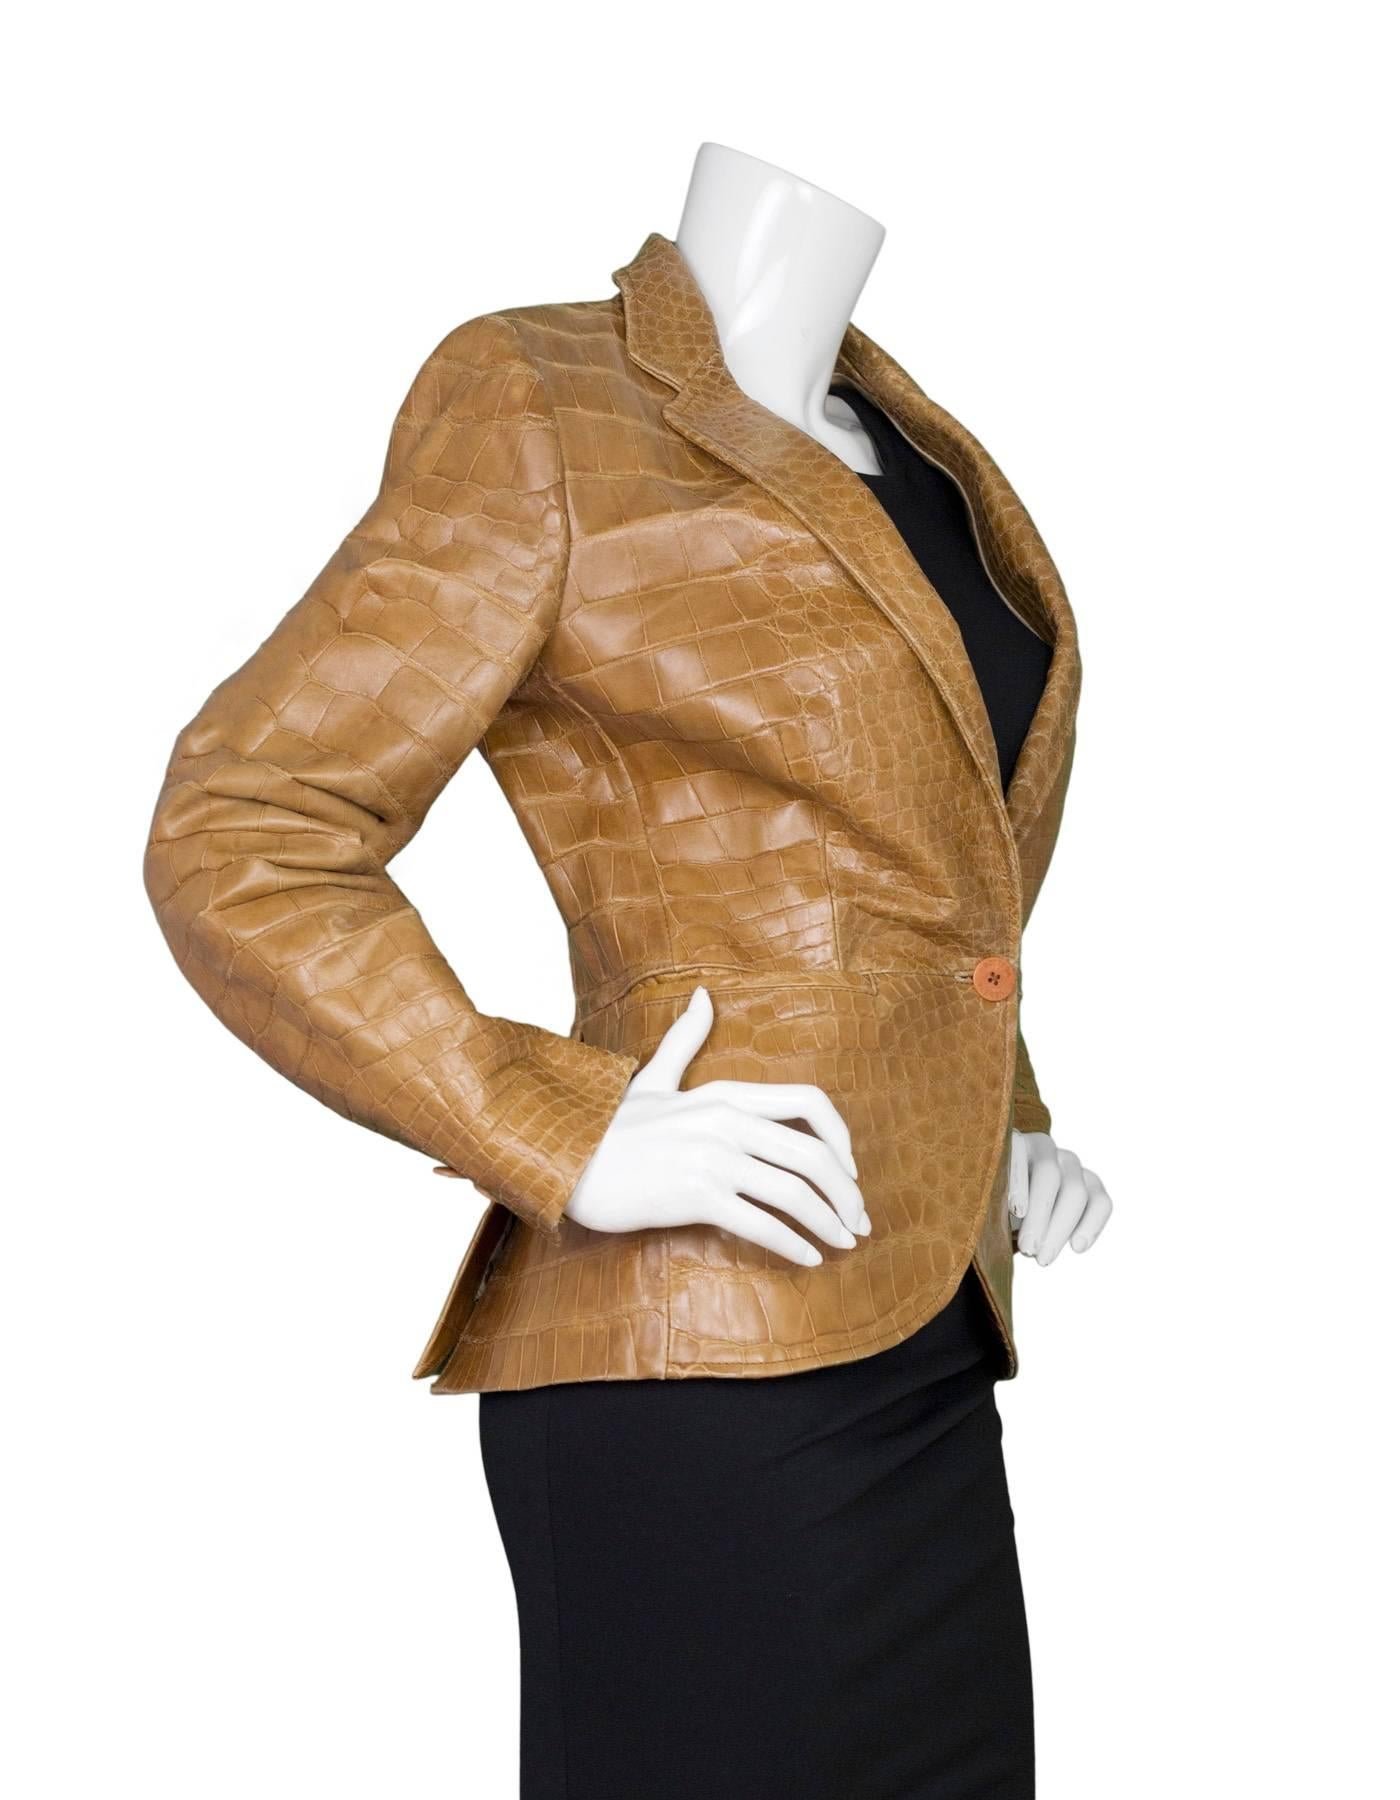 Bottega Veneta Tan Crocodile Jacket 

Made In: Italy
Color: Tan
Composition: Crocodile leather
Lining: Beige, 55% cupro, 45% rayon
Closure/Opening: Single button closure
Exterior Pockets: Two hip pockets
Interior Pockets: None
Overall Condition: